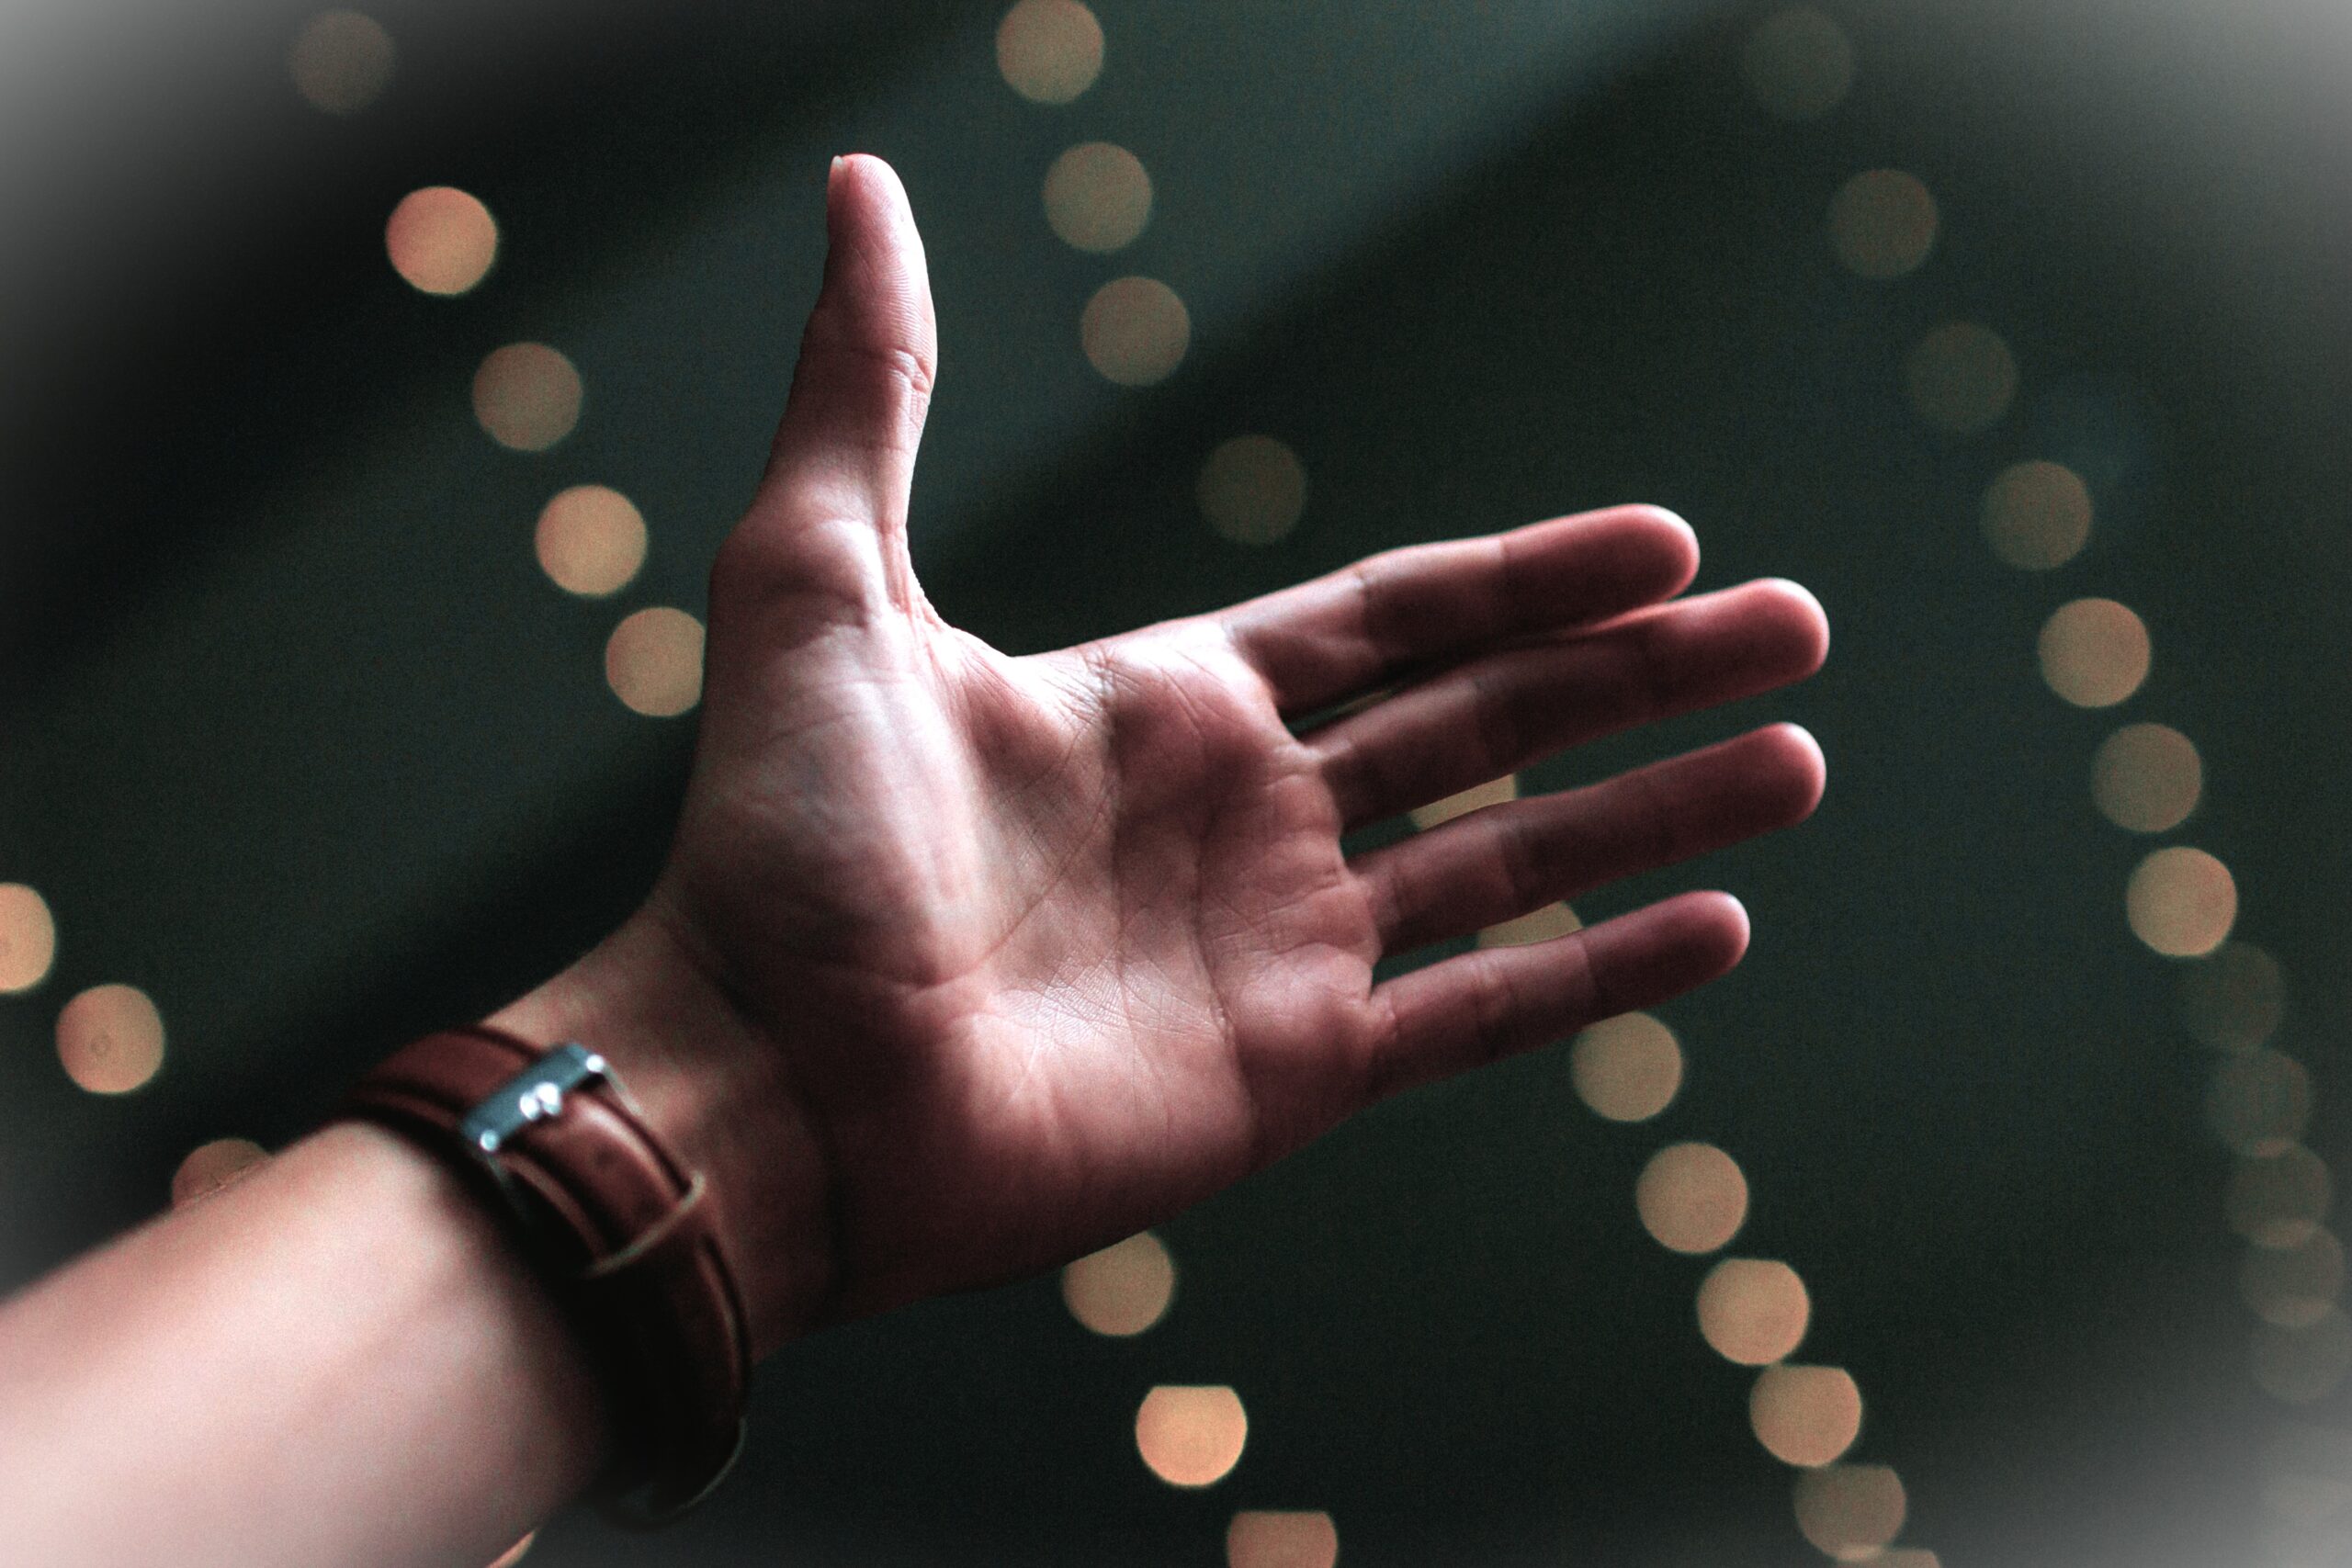 A man's hand showing the palm. Photo by Jordan Whitfield on Unsplash